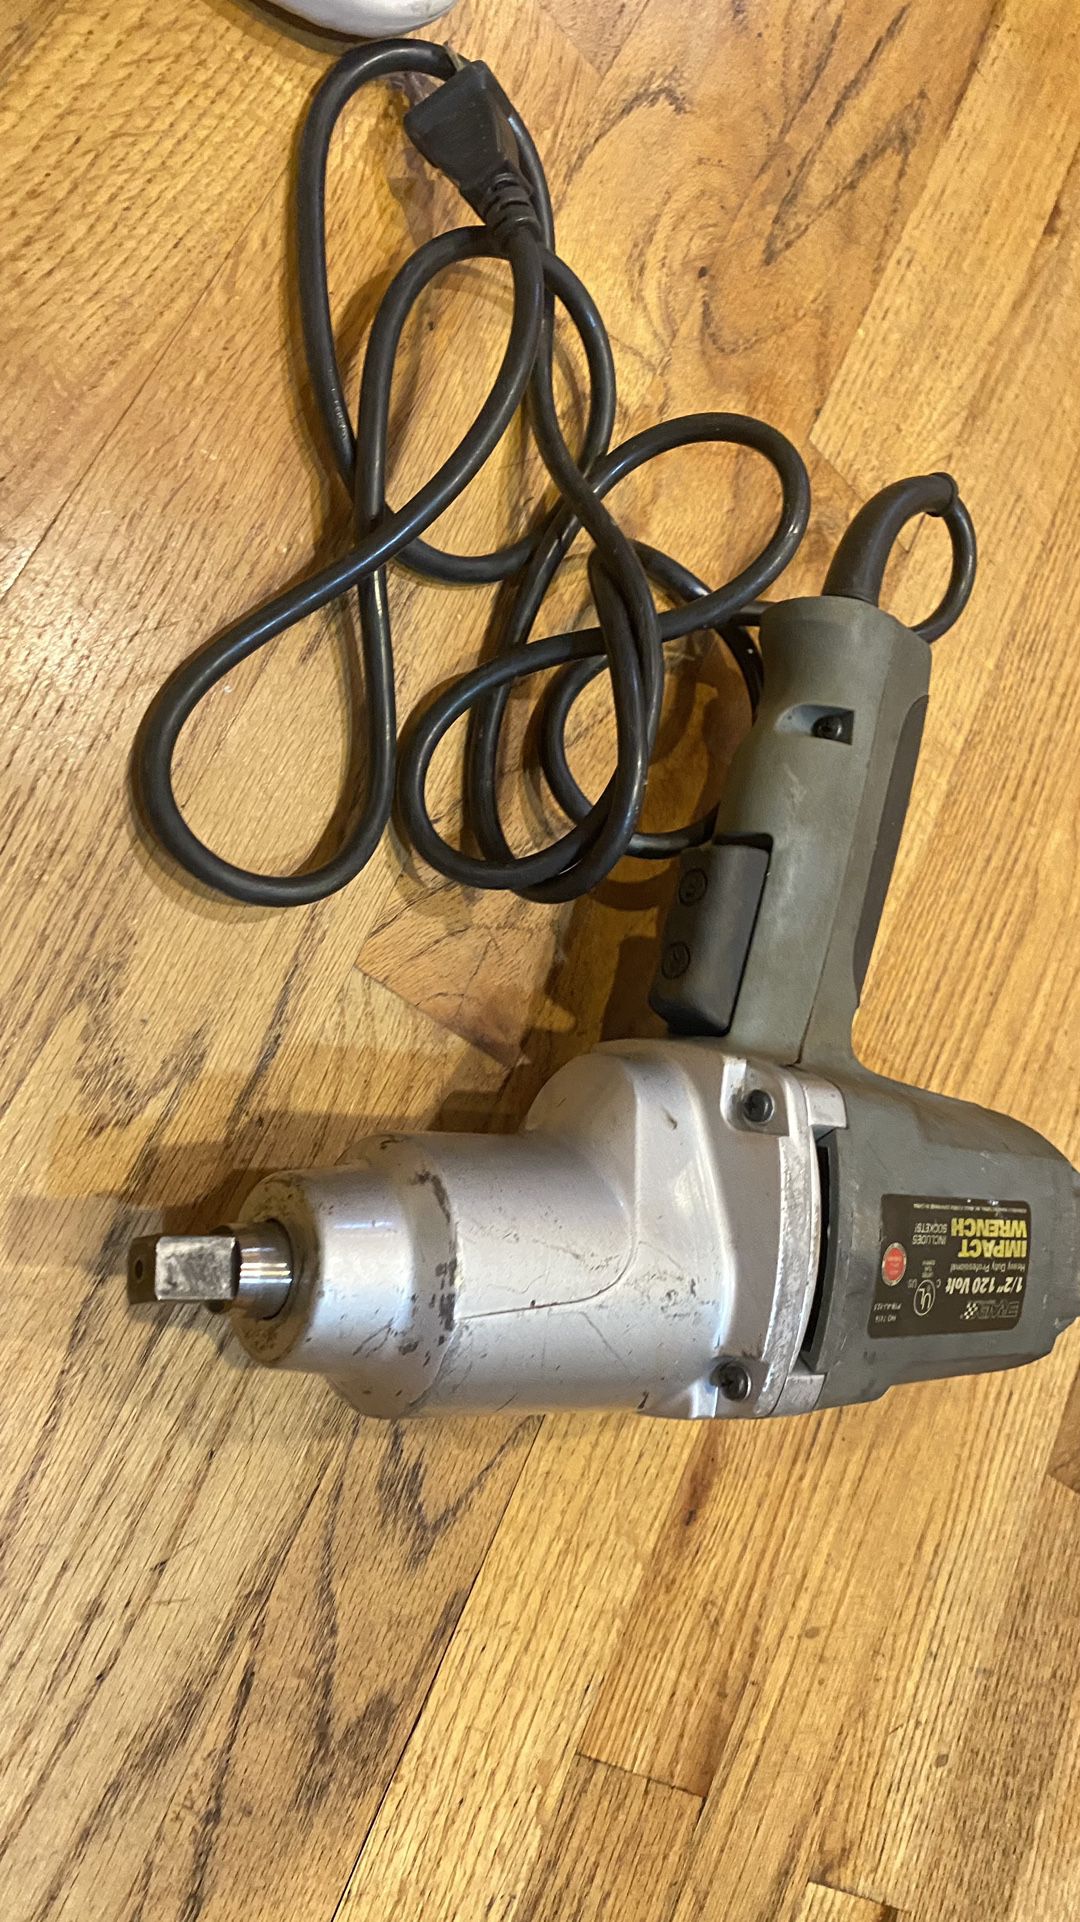 1/2 120volt Electric Impact Wrench 